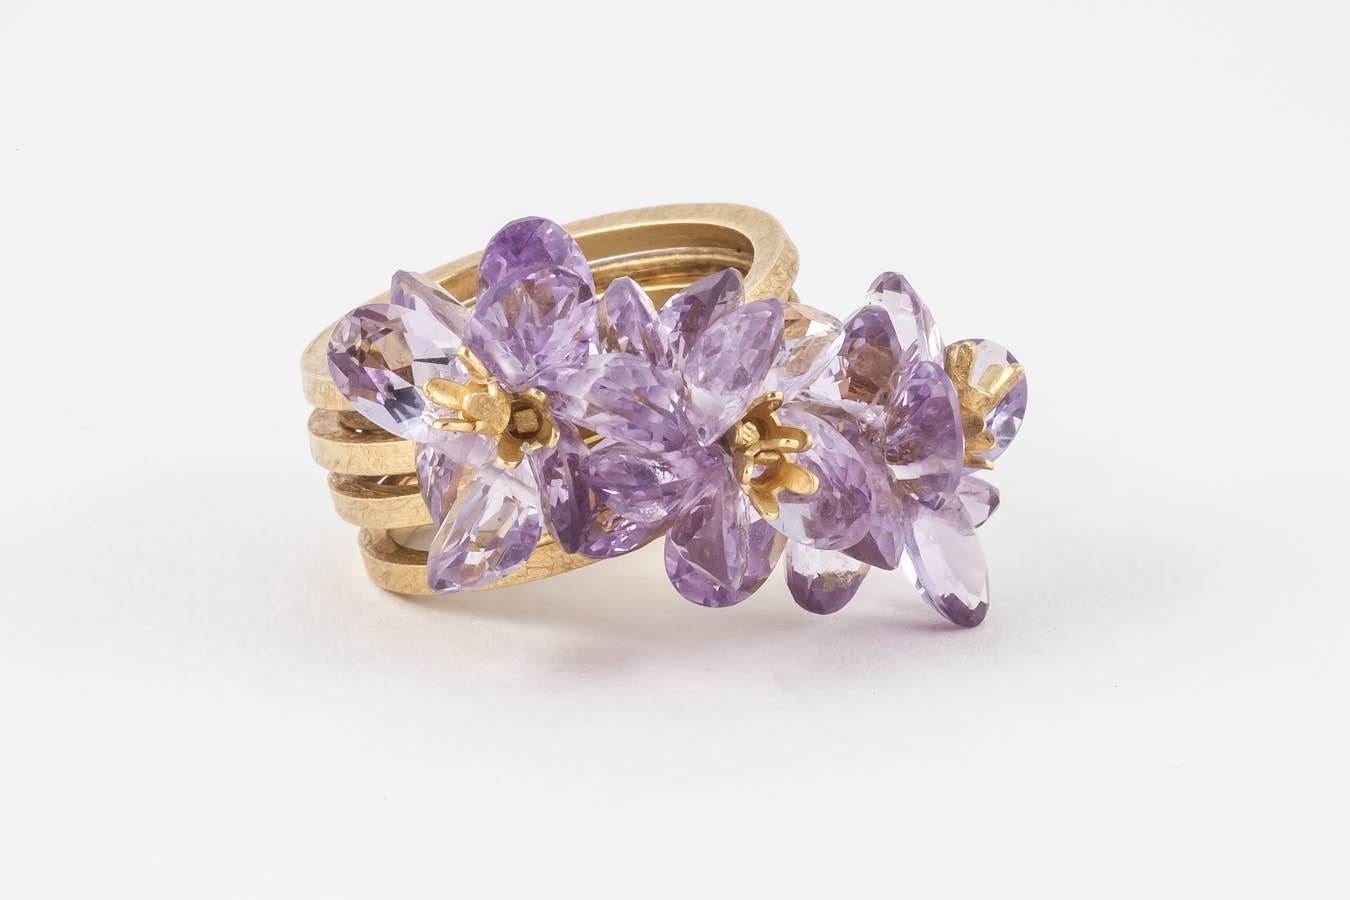 Exquisite Donna Brennan matt 18ct Gold Cocktail Ring featuring an array of Lilac Amethyst stones in a size 6 3/4 - 7 (size N).

Donna's work typically features sculpturally wrapped rings hewn from 18ct Gold, clustered with an assemblage of